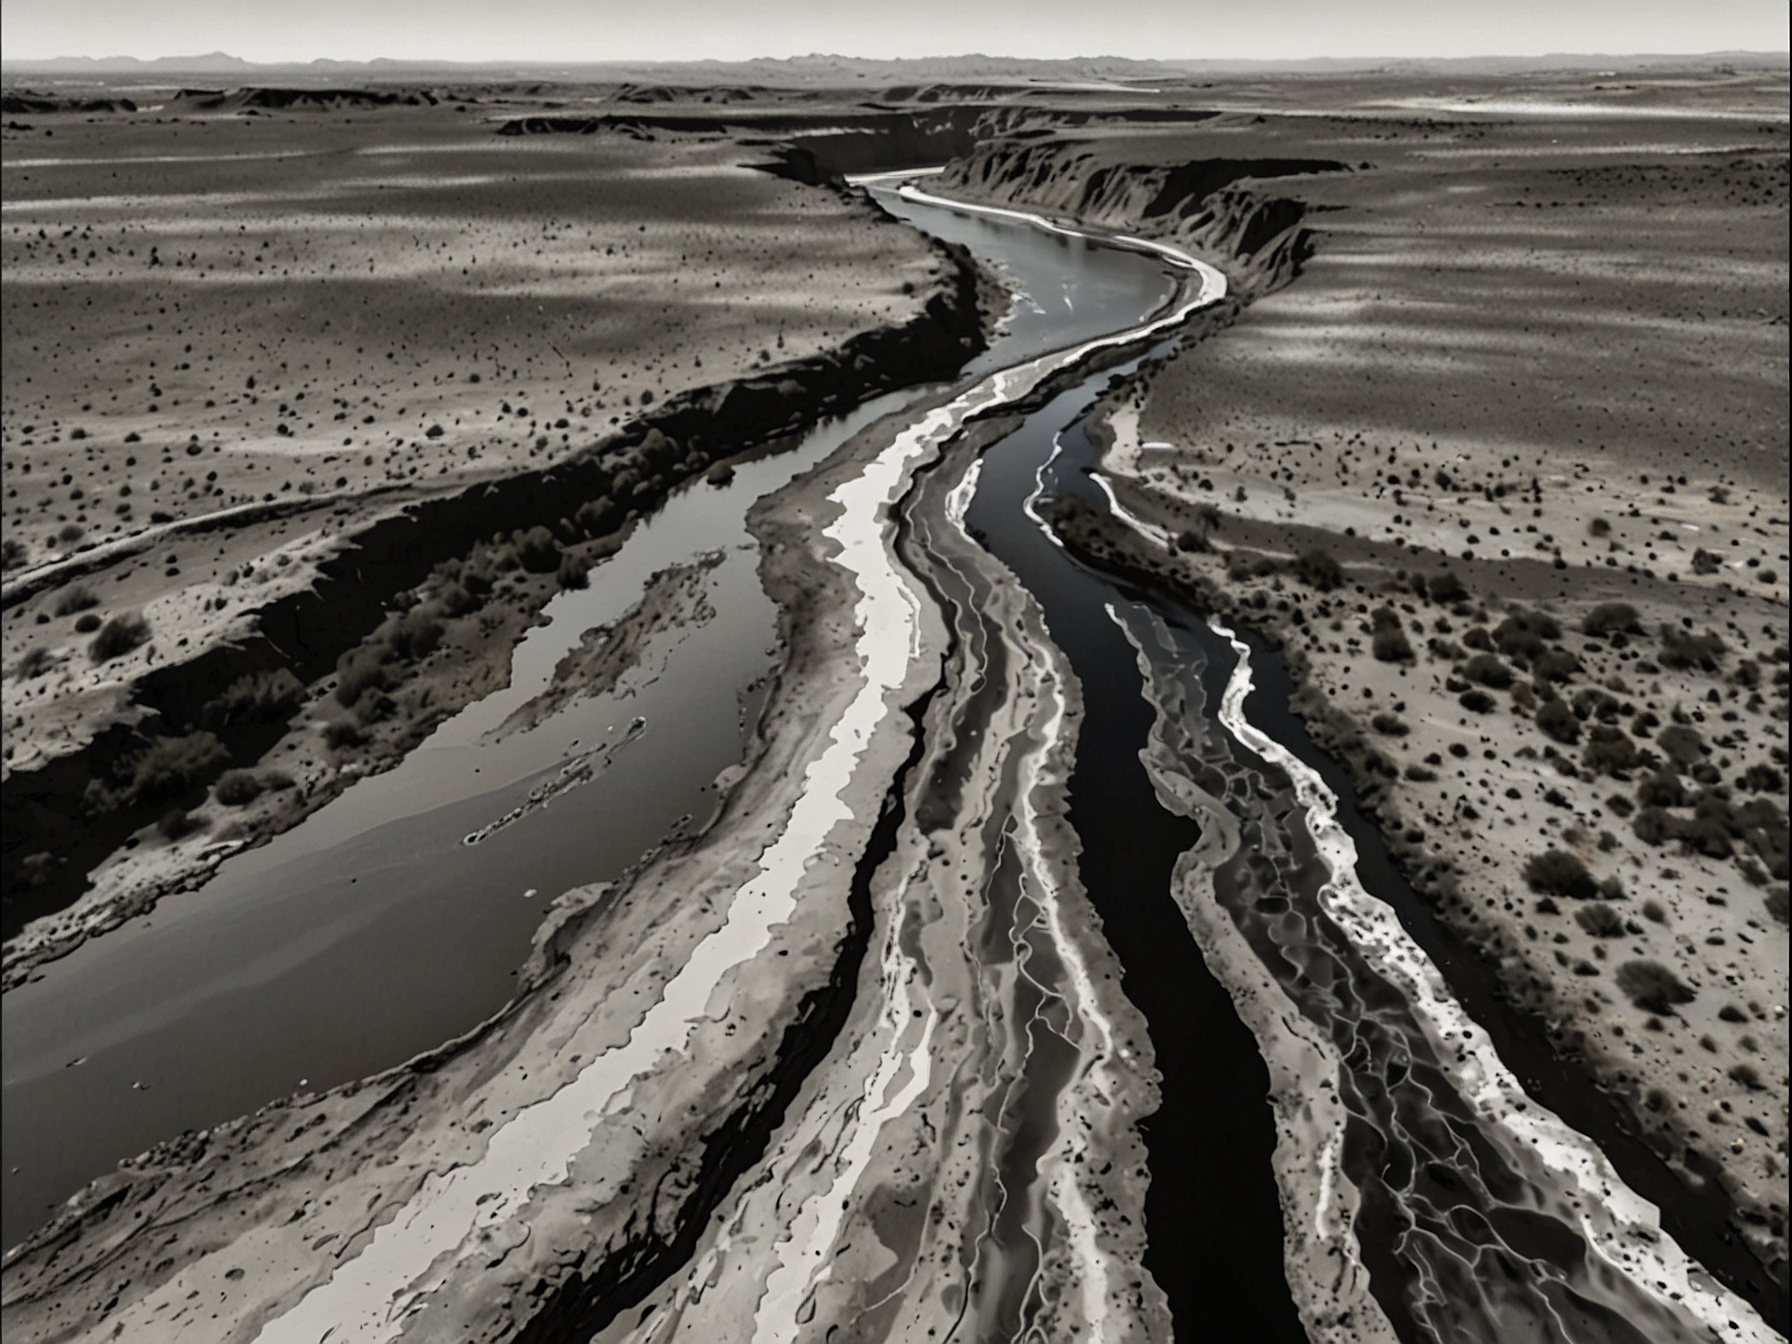 Aerial view of the Rio Grande river showing its meandering course through arid landscapes in New Mexico, highlighting the region's dependence on this crucial water source.